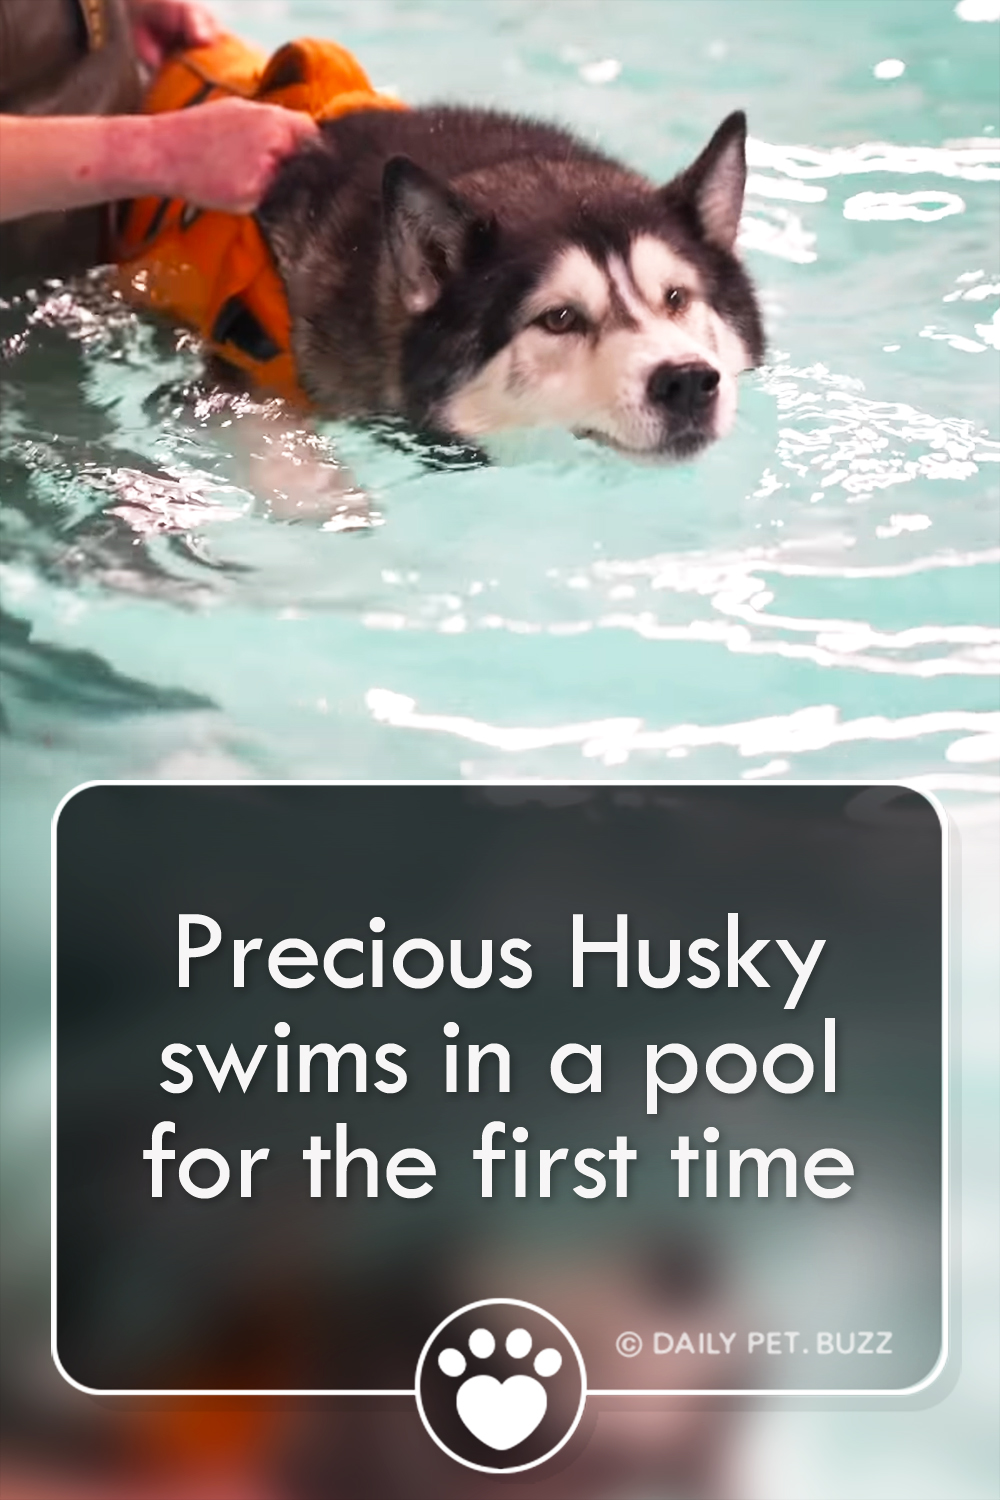 Precious Husky swims in a pool for the first time